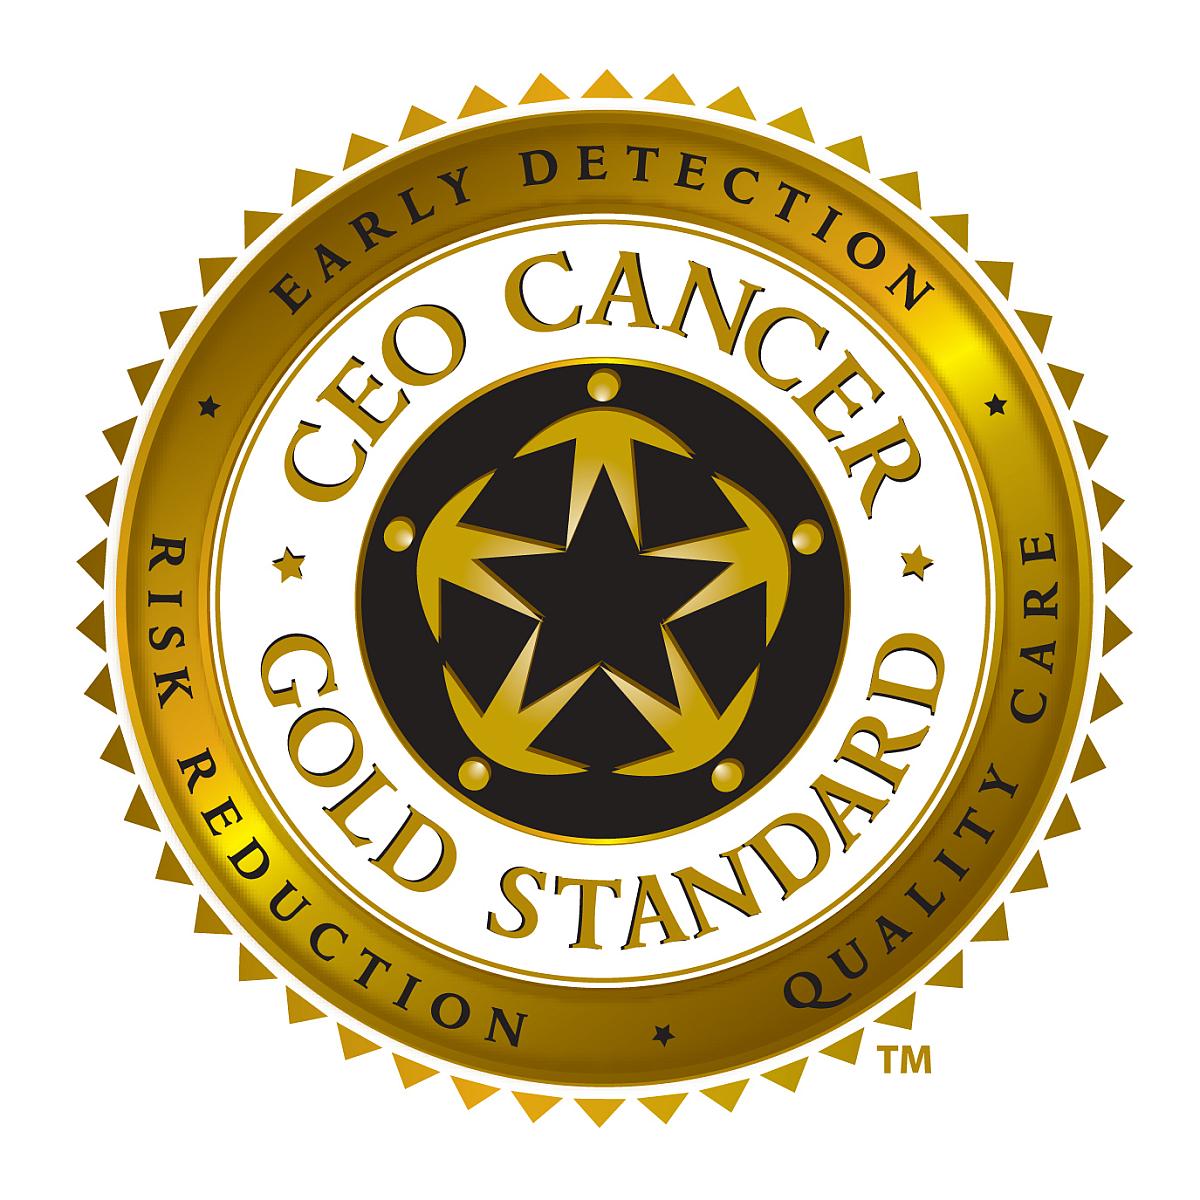 CEO Cancer Gold Standard™ Accreditation